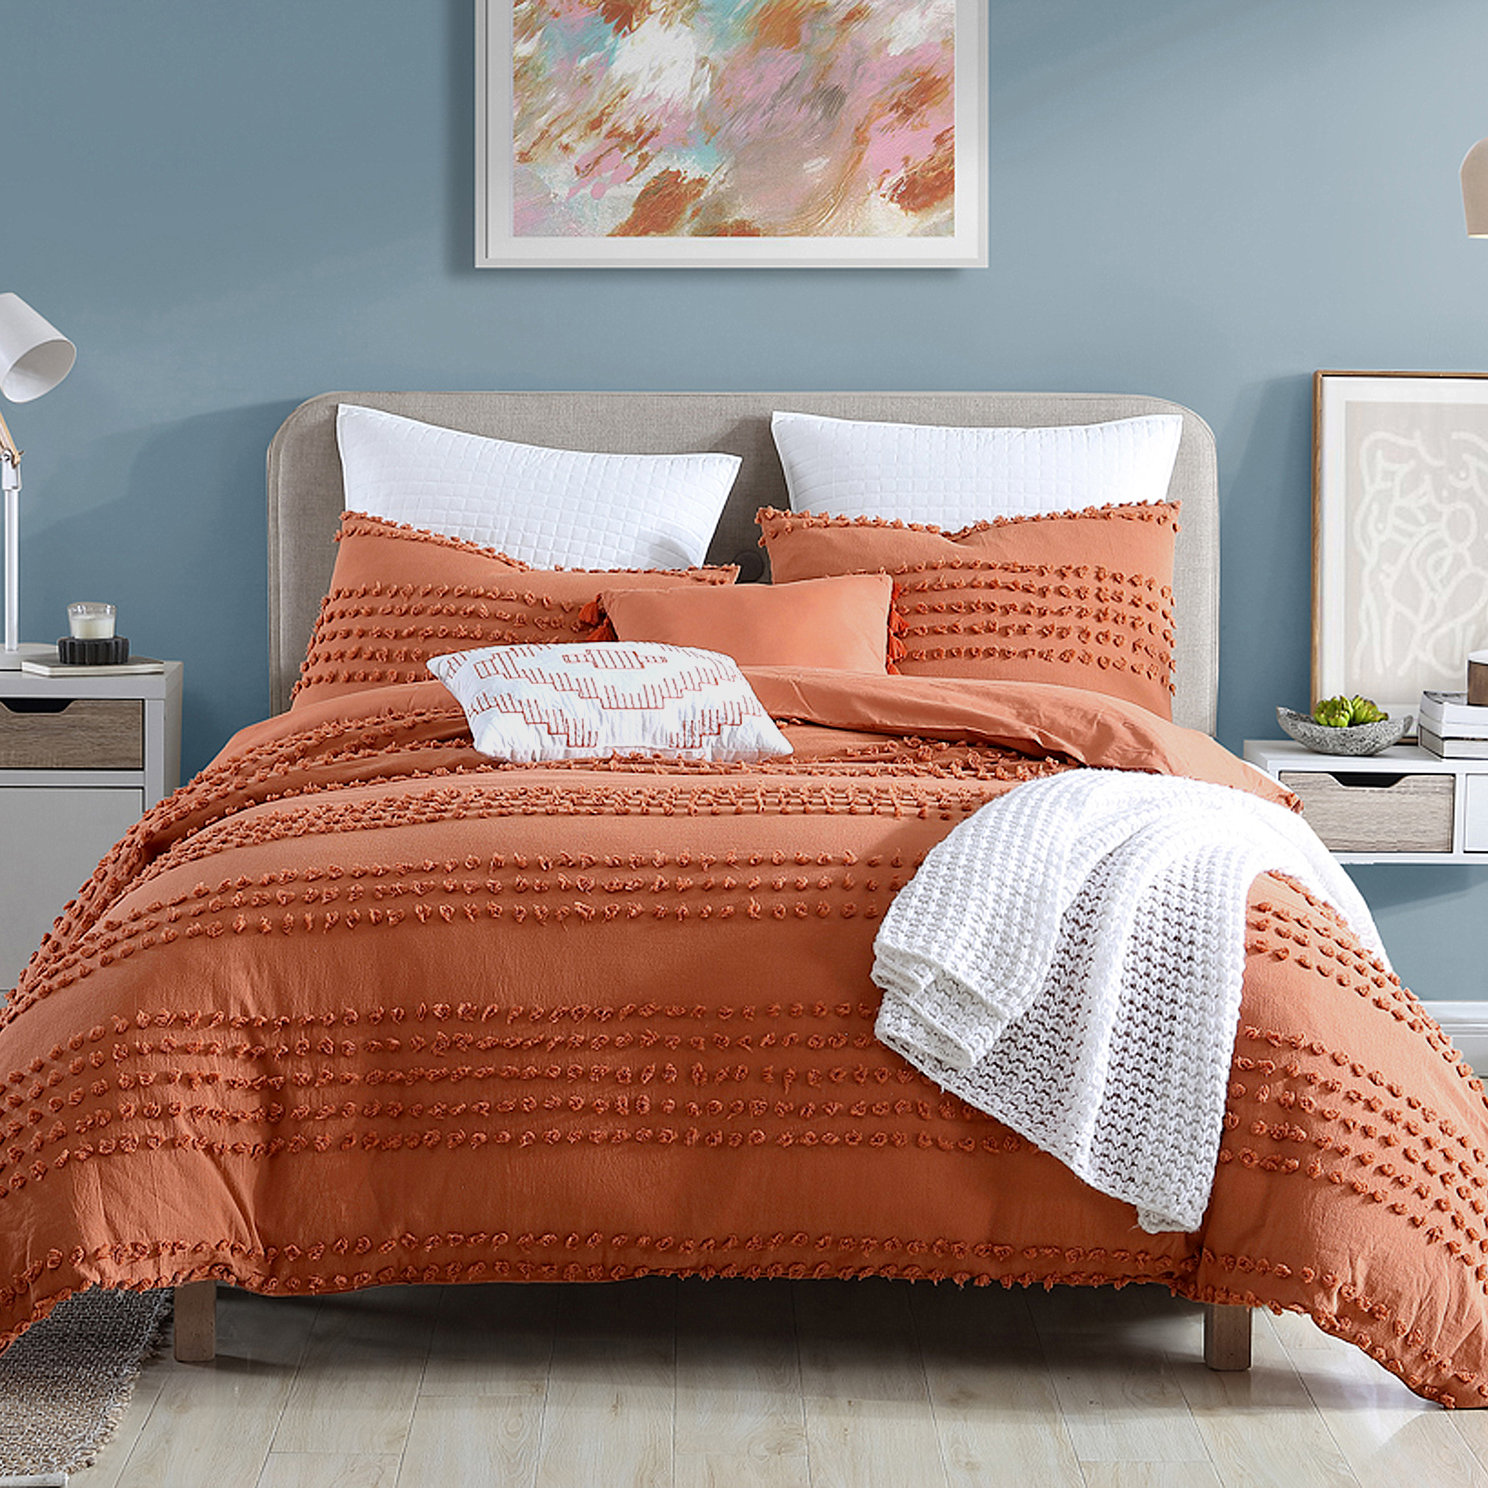 My favorite bedding products, Gallery posted by Melina